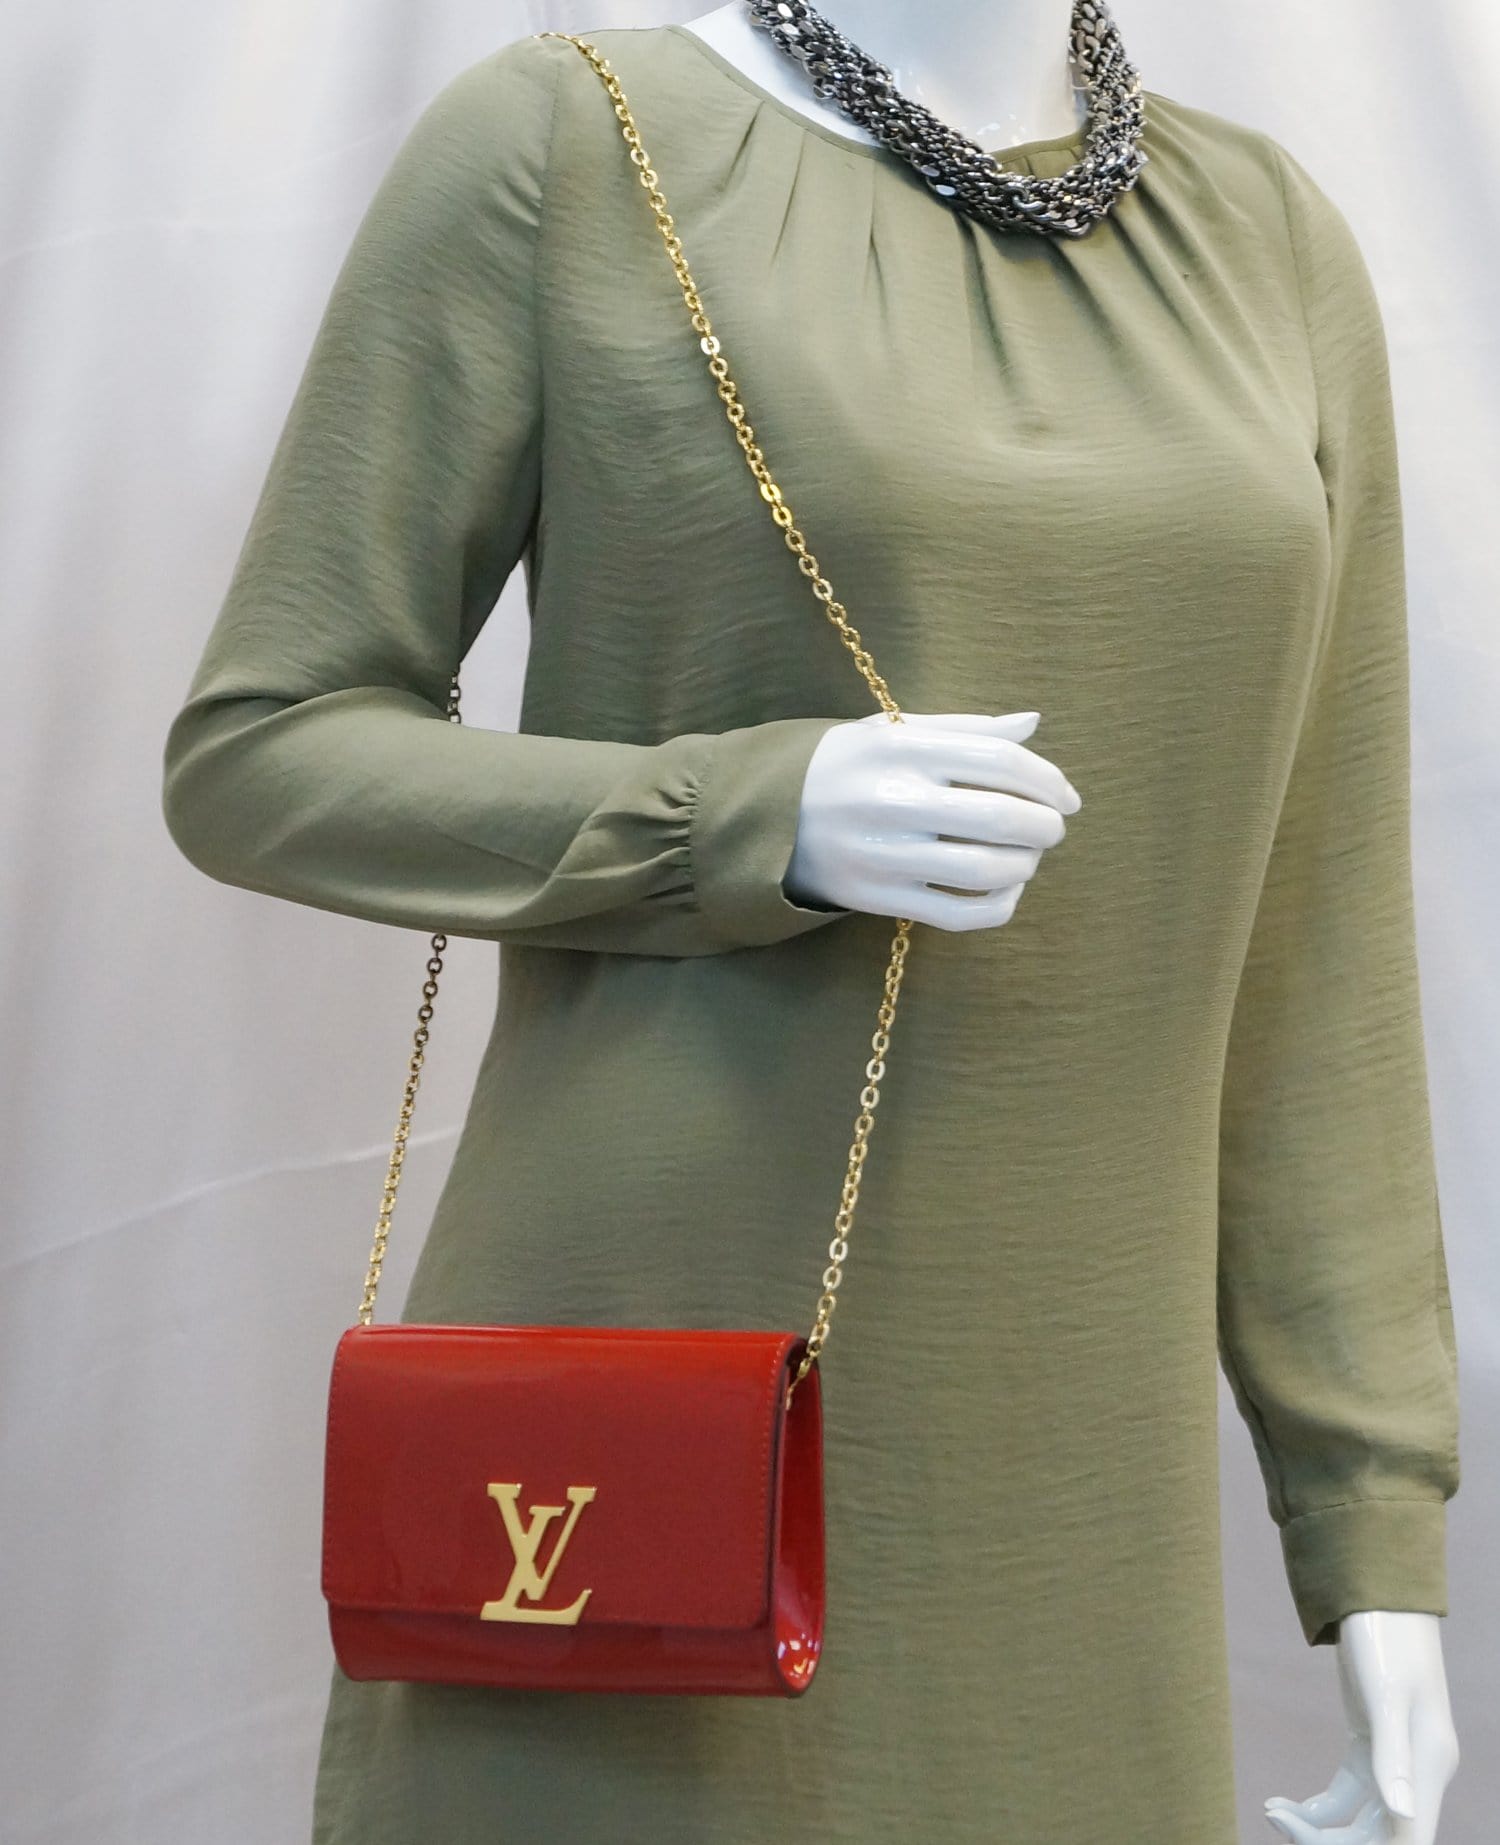 Louis Vuitton - Authenticated Crown Frame Clutch Bag - Patent Leather Red Plain for Women, Very Good Condition